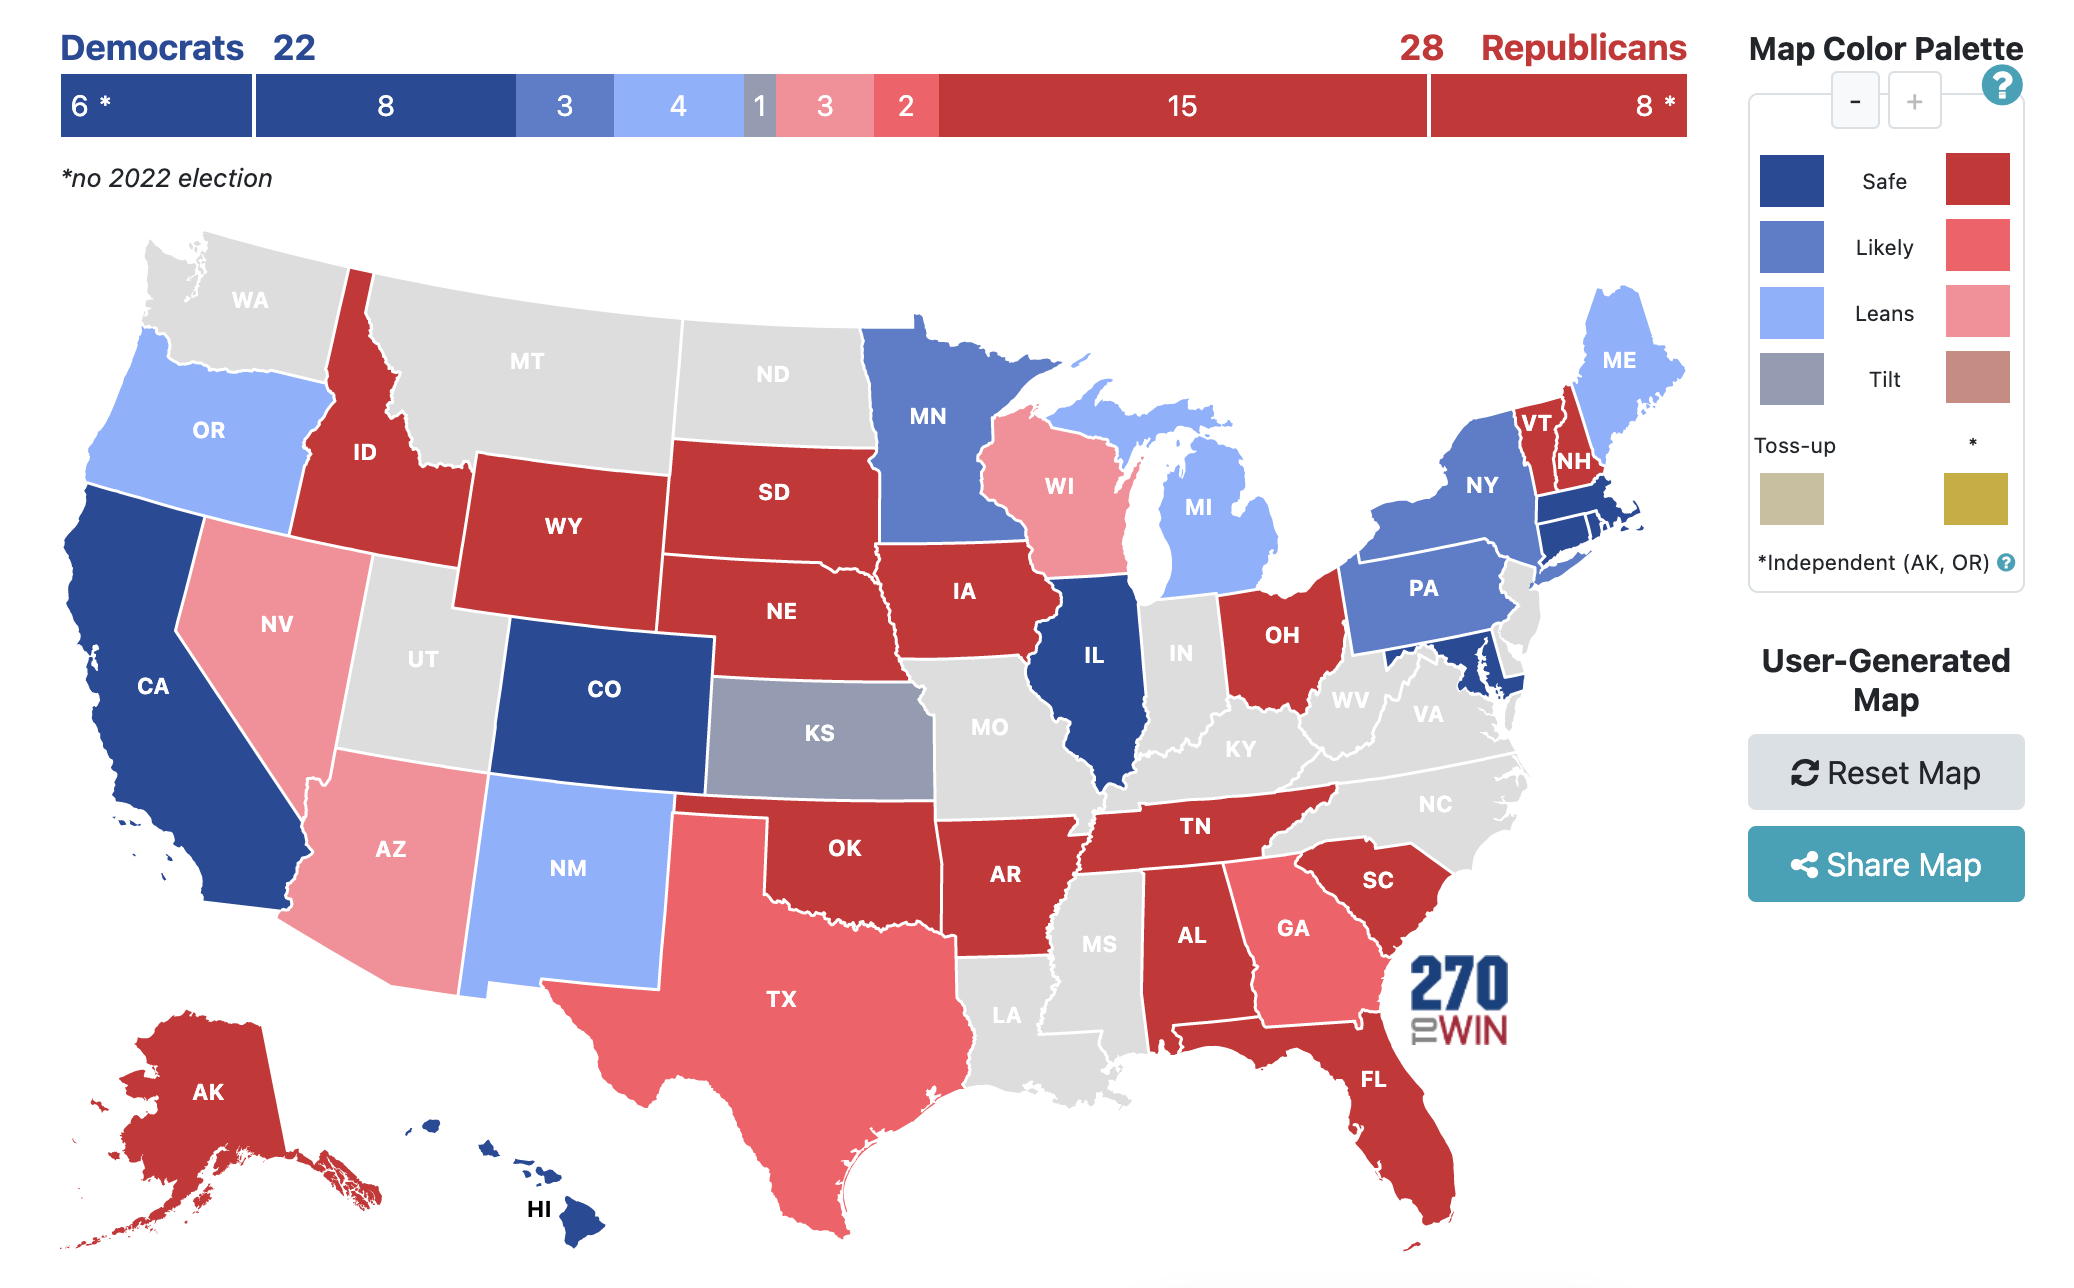 Final predictions for the 2022 US midterm elections